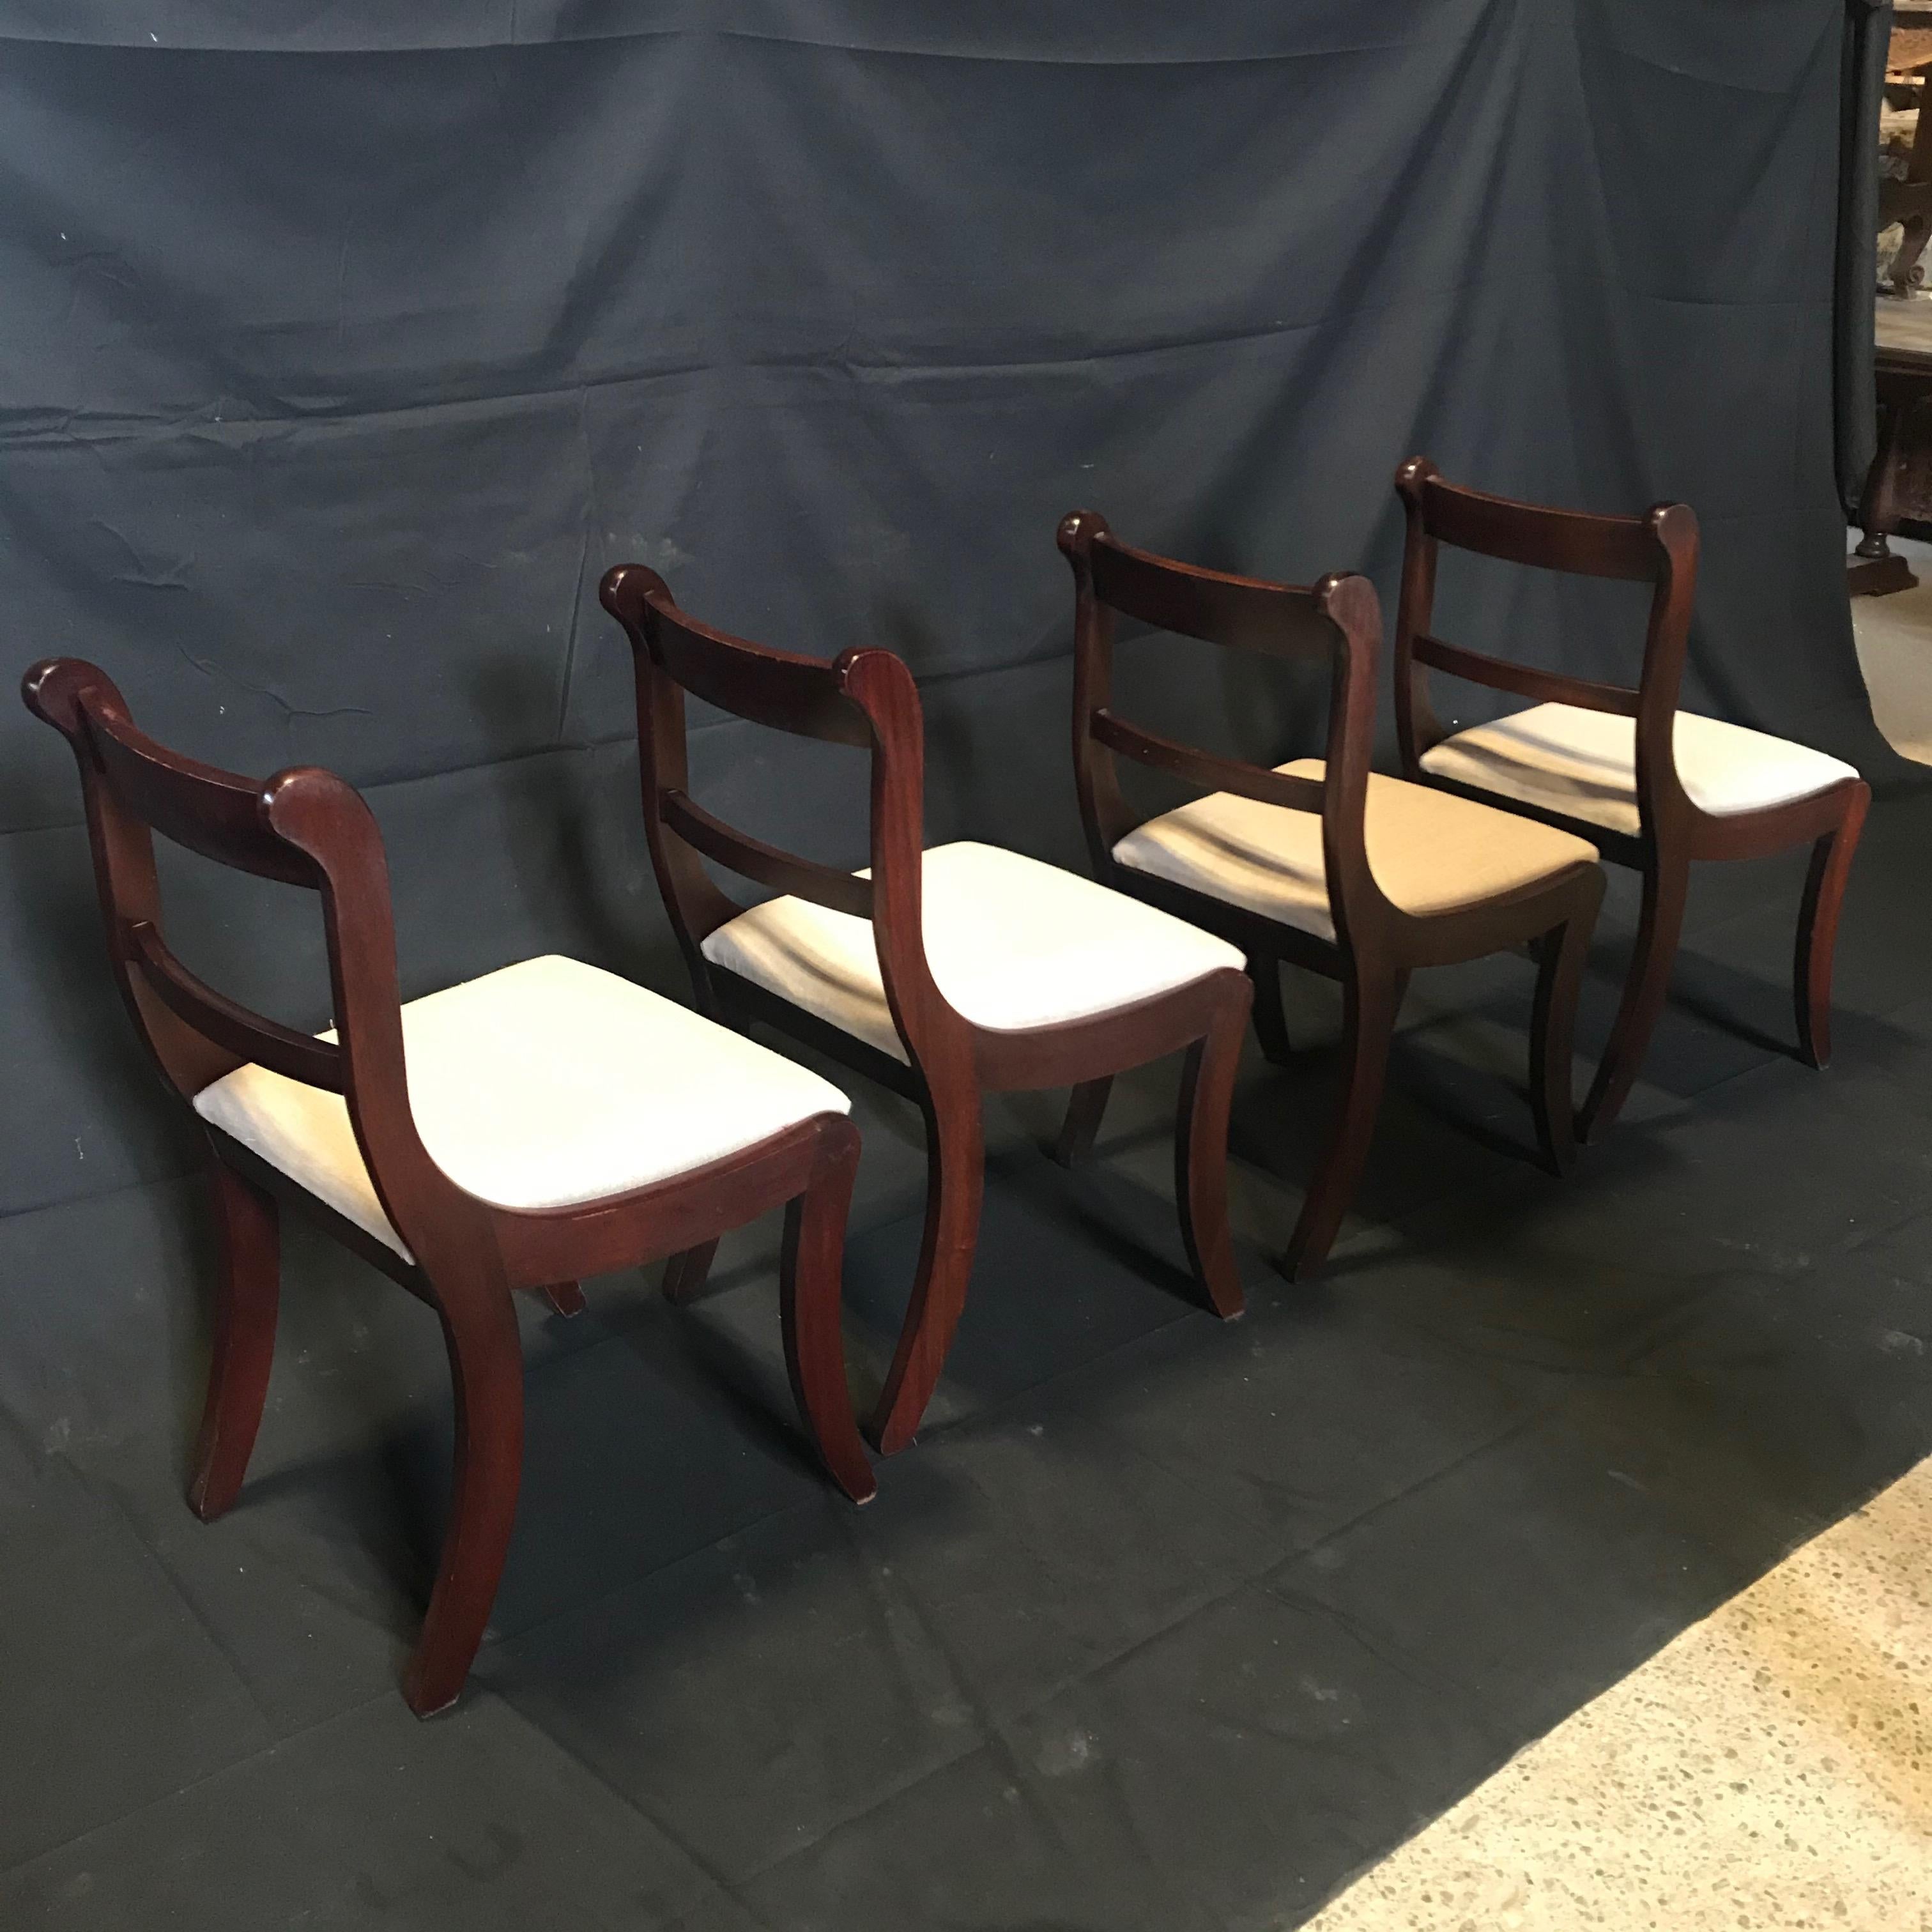 19th Century Set of 4 English Regency Mahogany and Brass Inlaid Dining Chairs